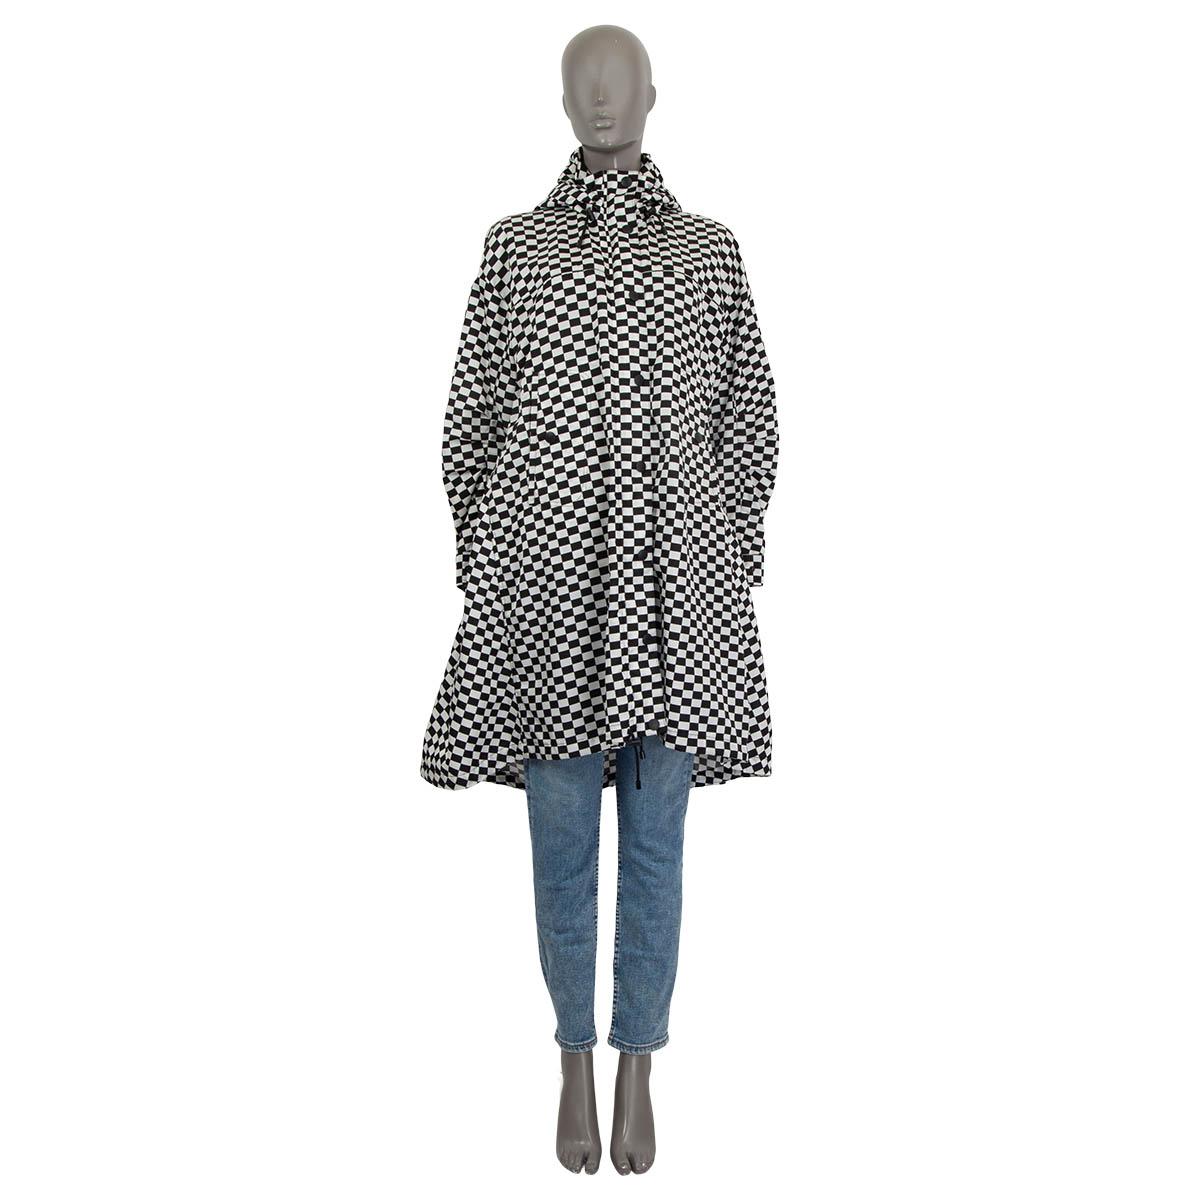 100% authentic Christian Dior 2018 oversized check rain coat in black and white polyamide (100%). Features a hideable hood and drawstring fastening at the waist, neck and the back. Has buttoned cuffs, long sleeves and two buttoned slit pockets at